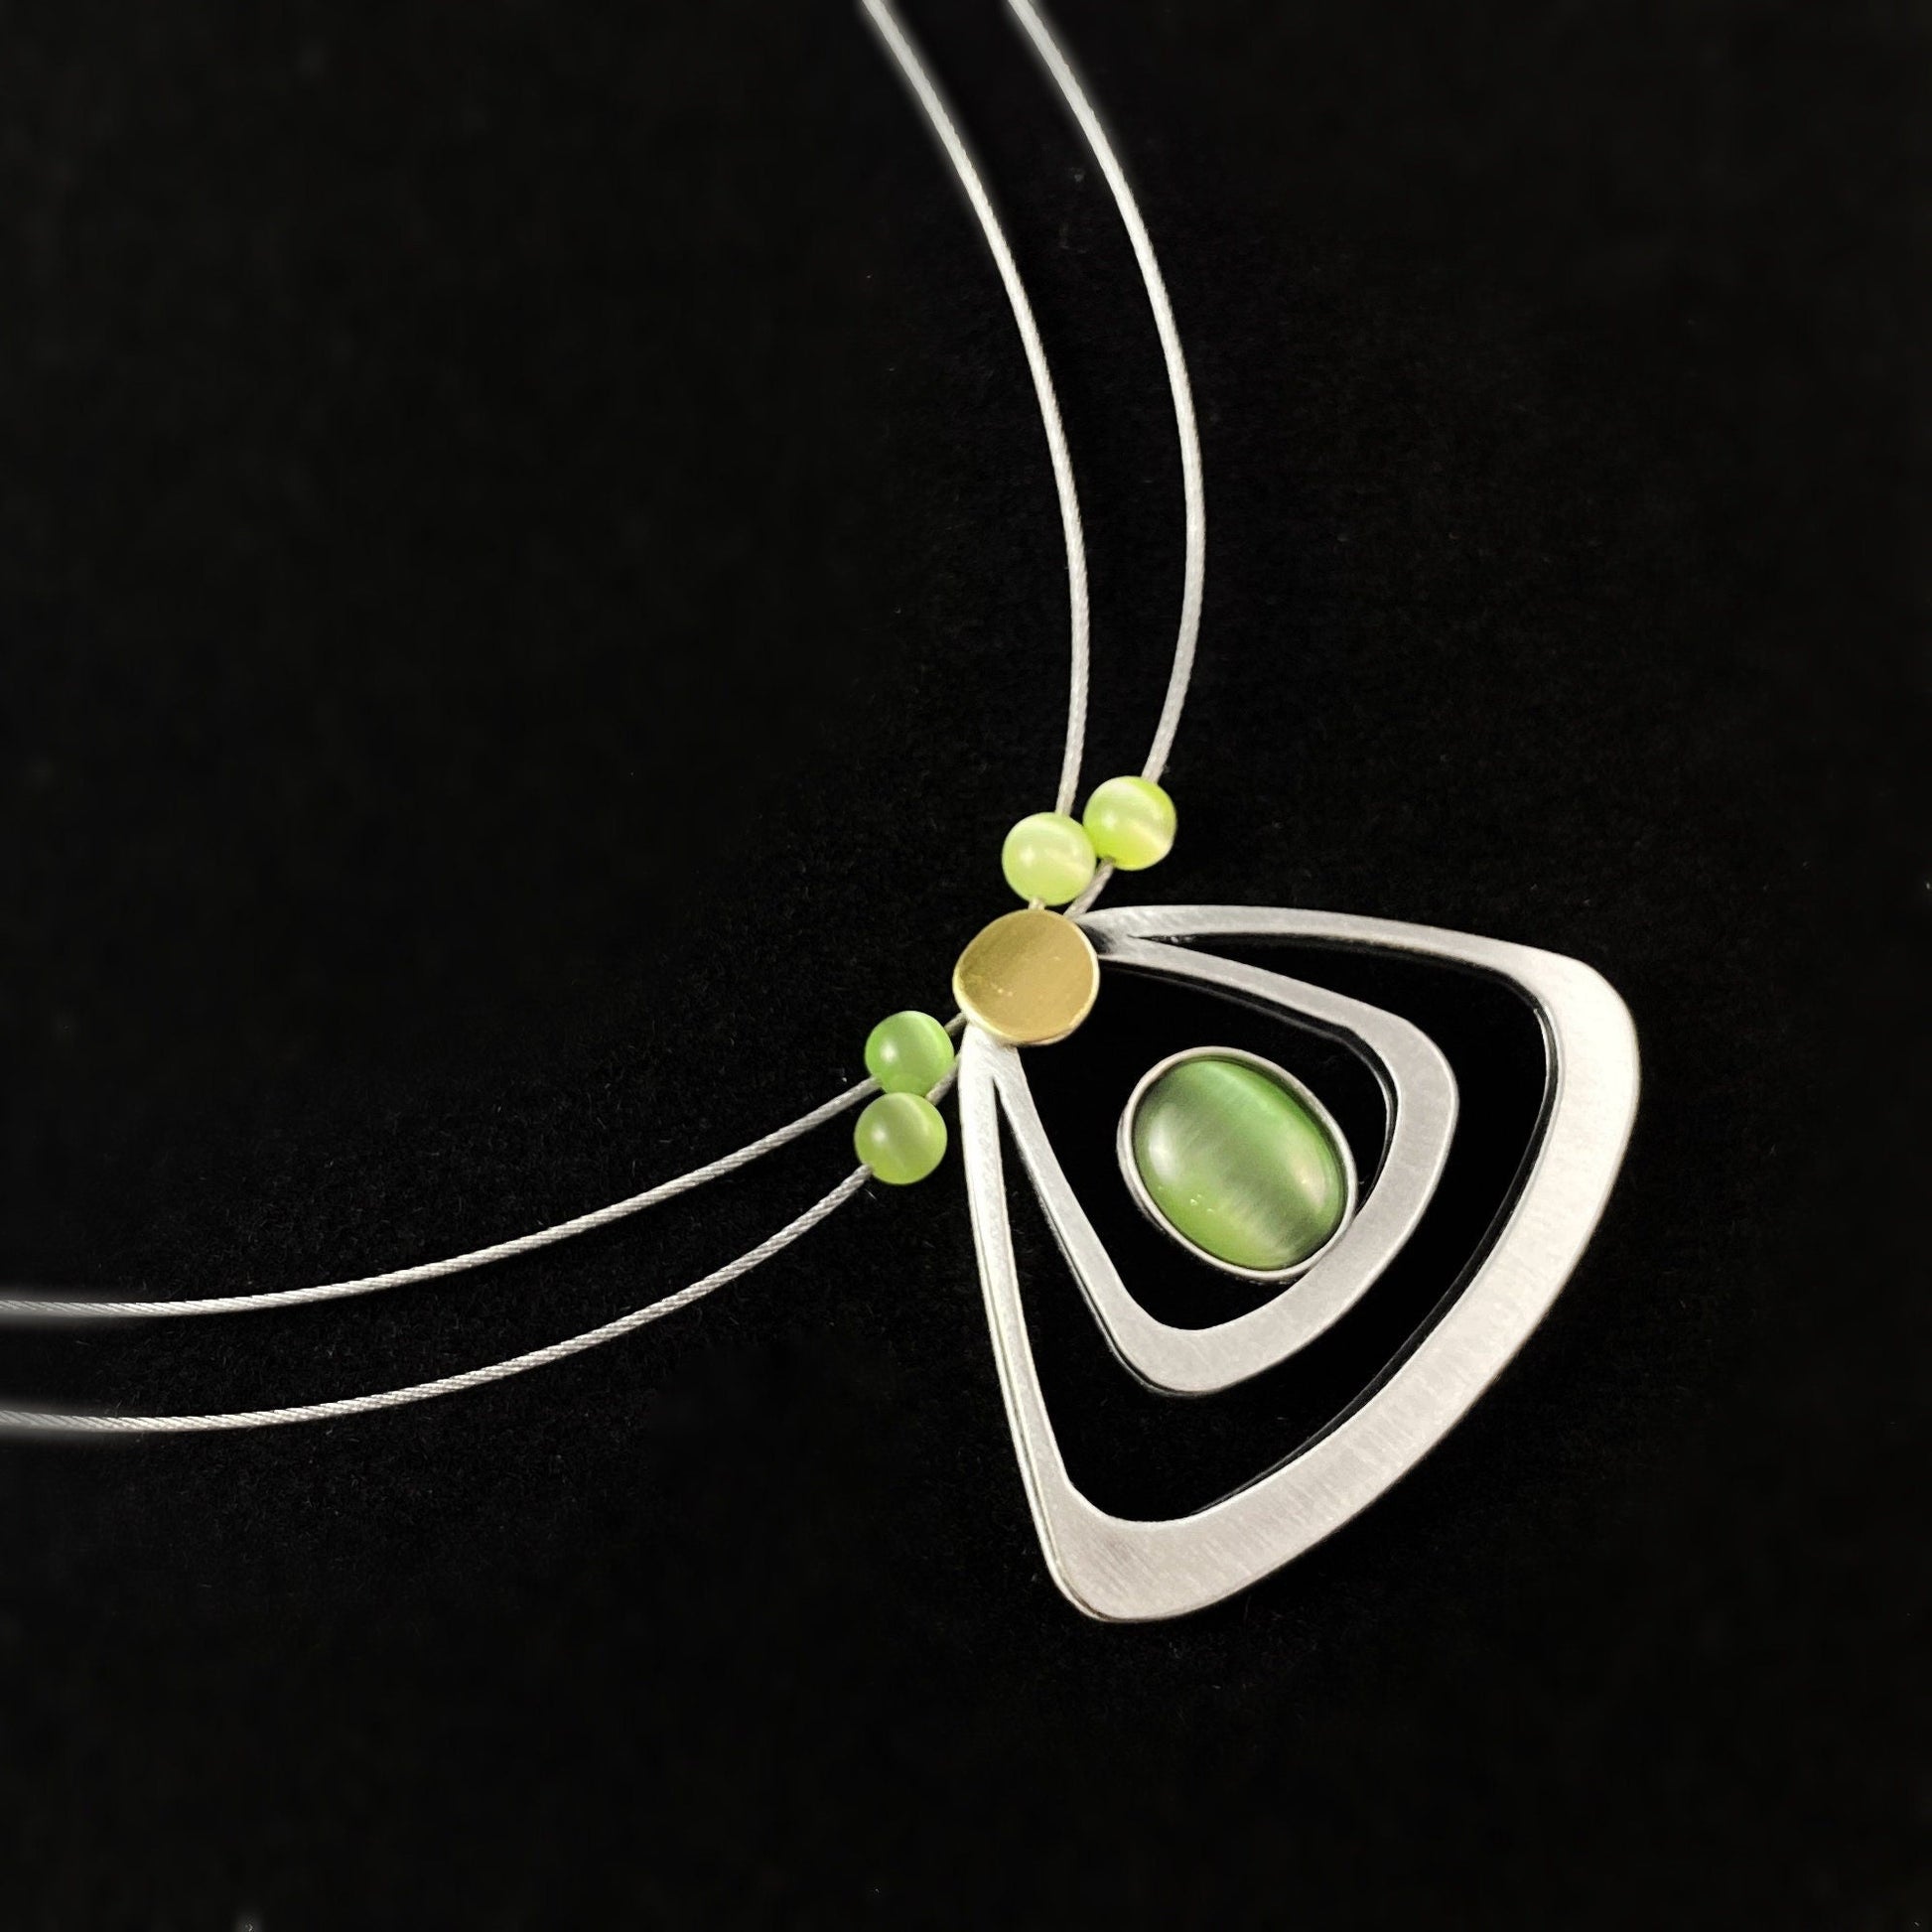 Lightweight Handmade Geometric Aluminum Necklace, Silver and Green Triangle